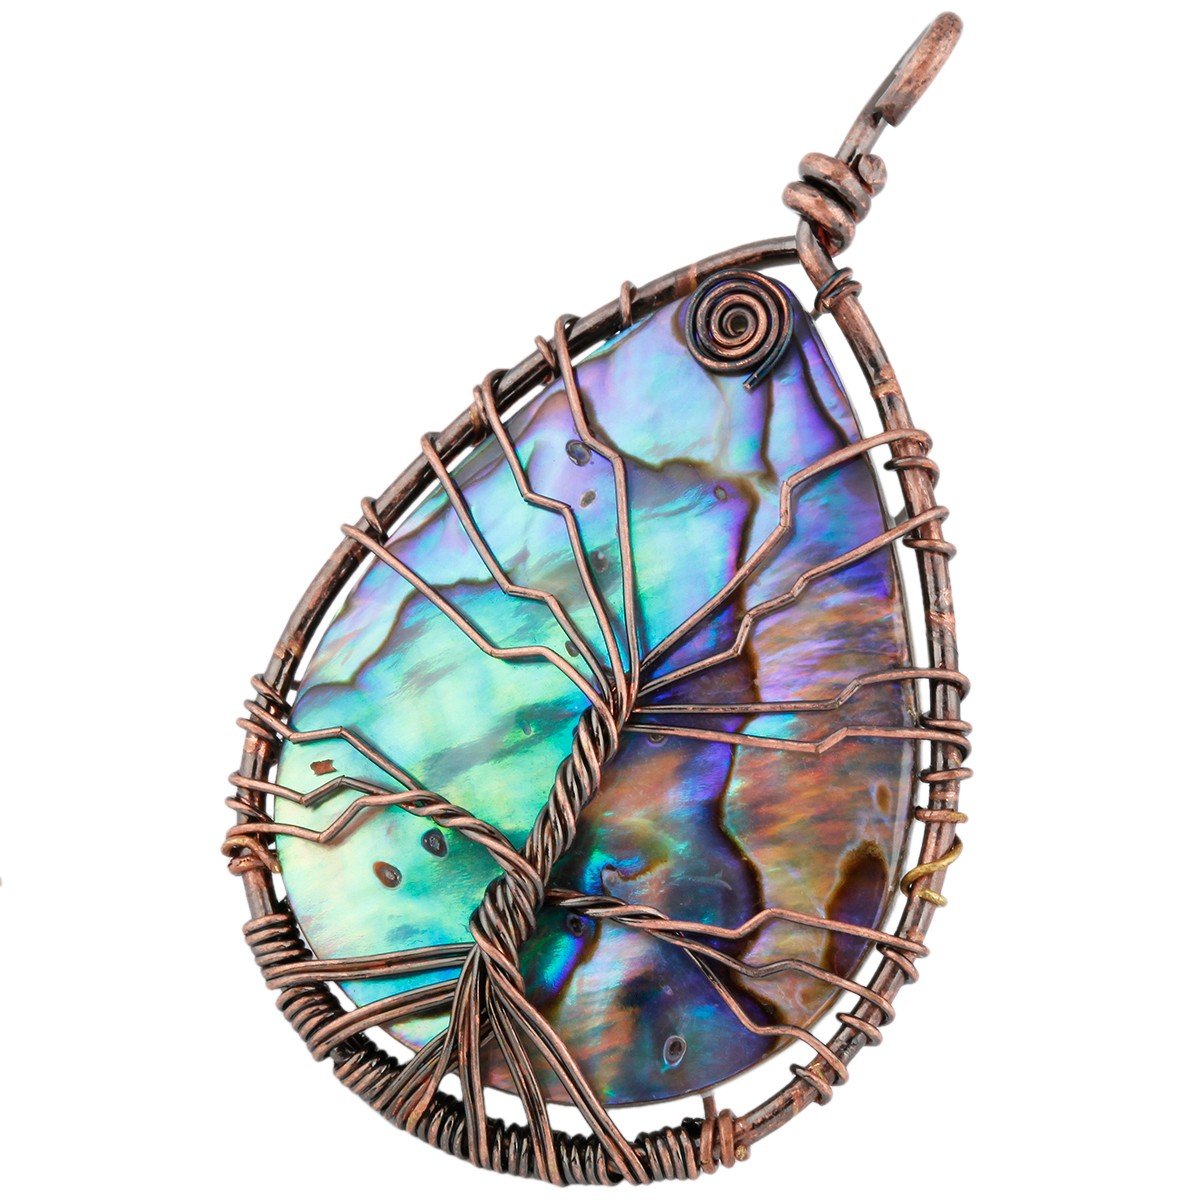 SUNYIK Abalone Shell Tree of Life Pendant,Necklaces for Women,Copper Wire Wrapped Jewelry,Assorted Shapes